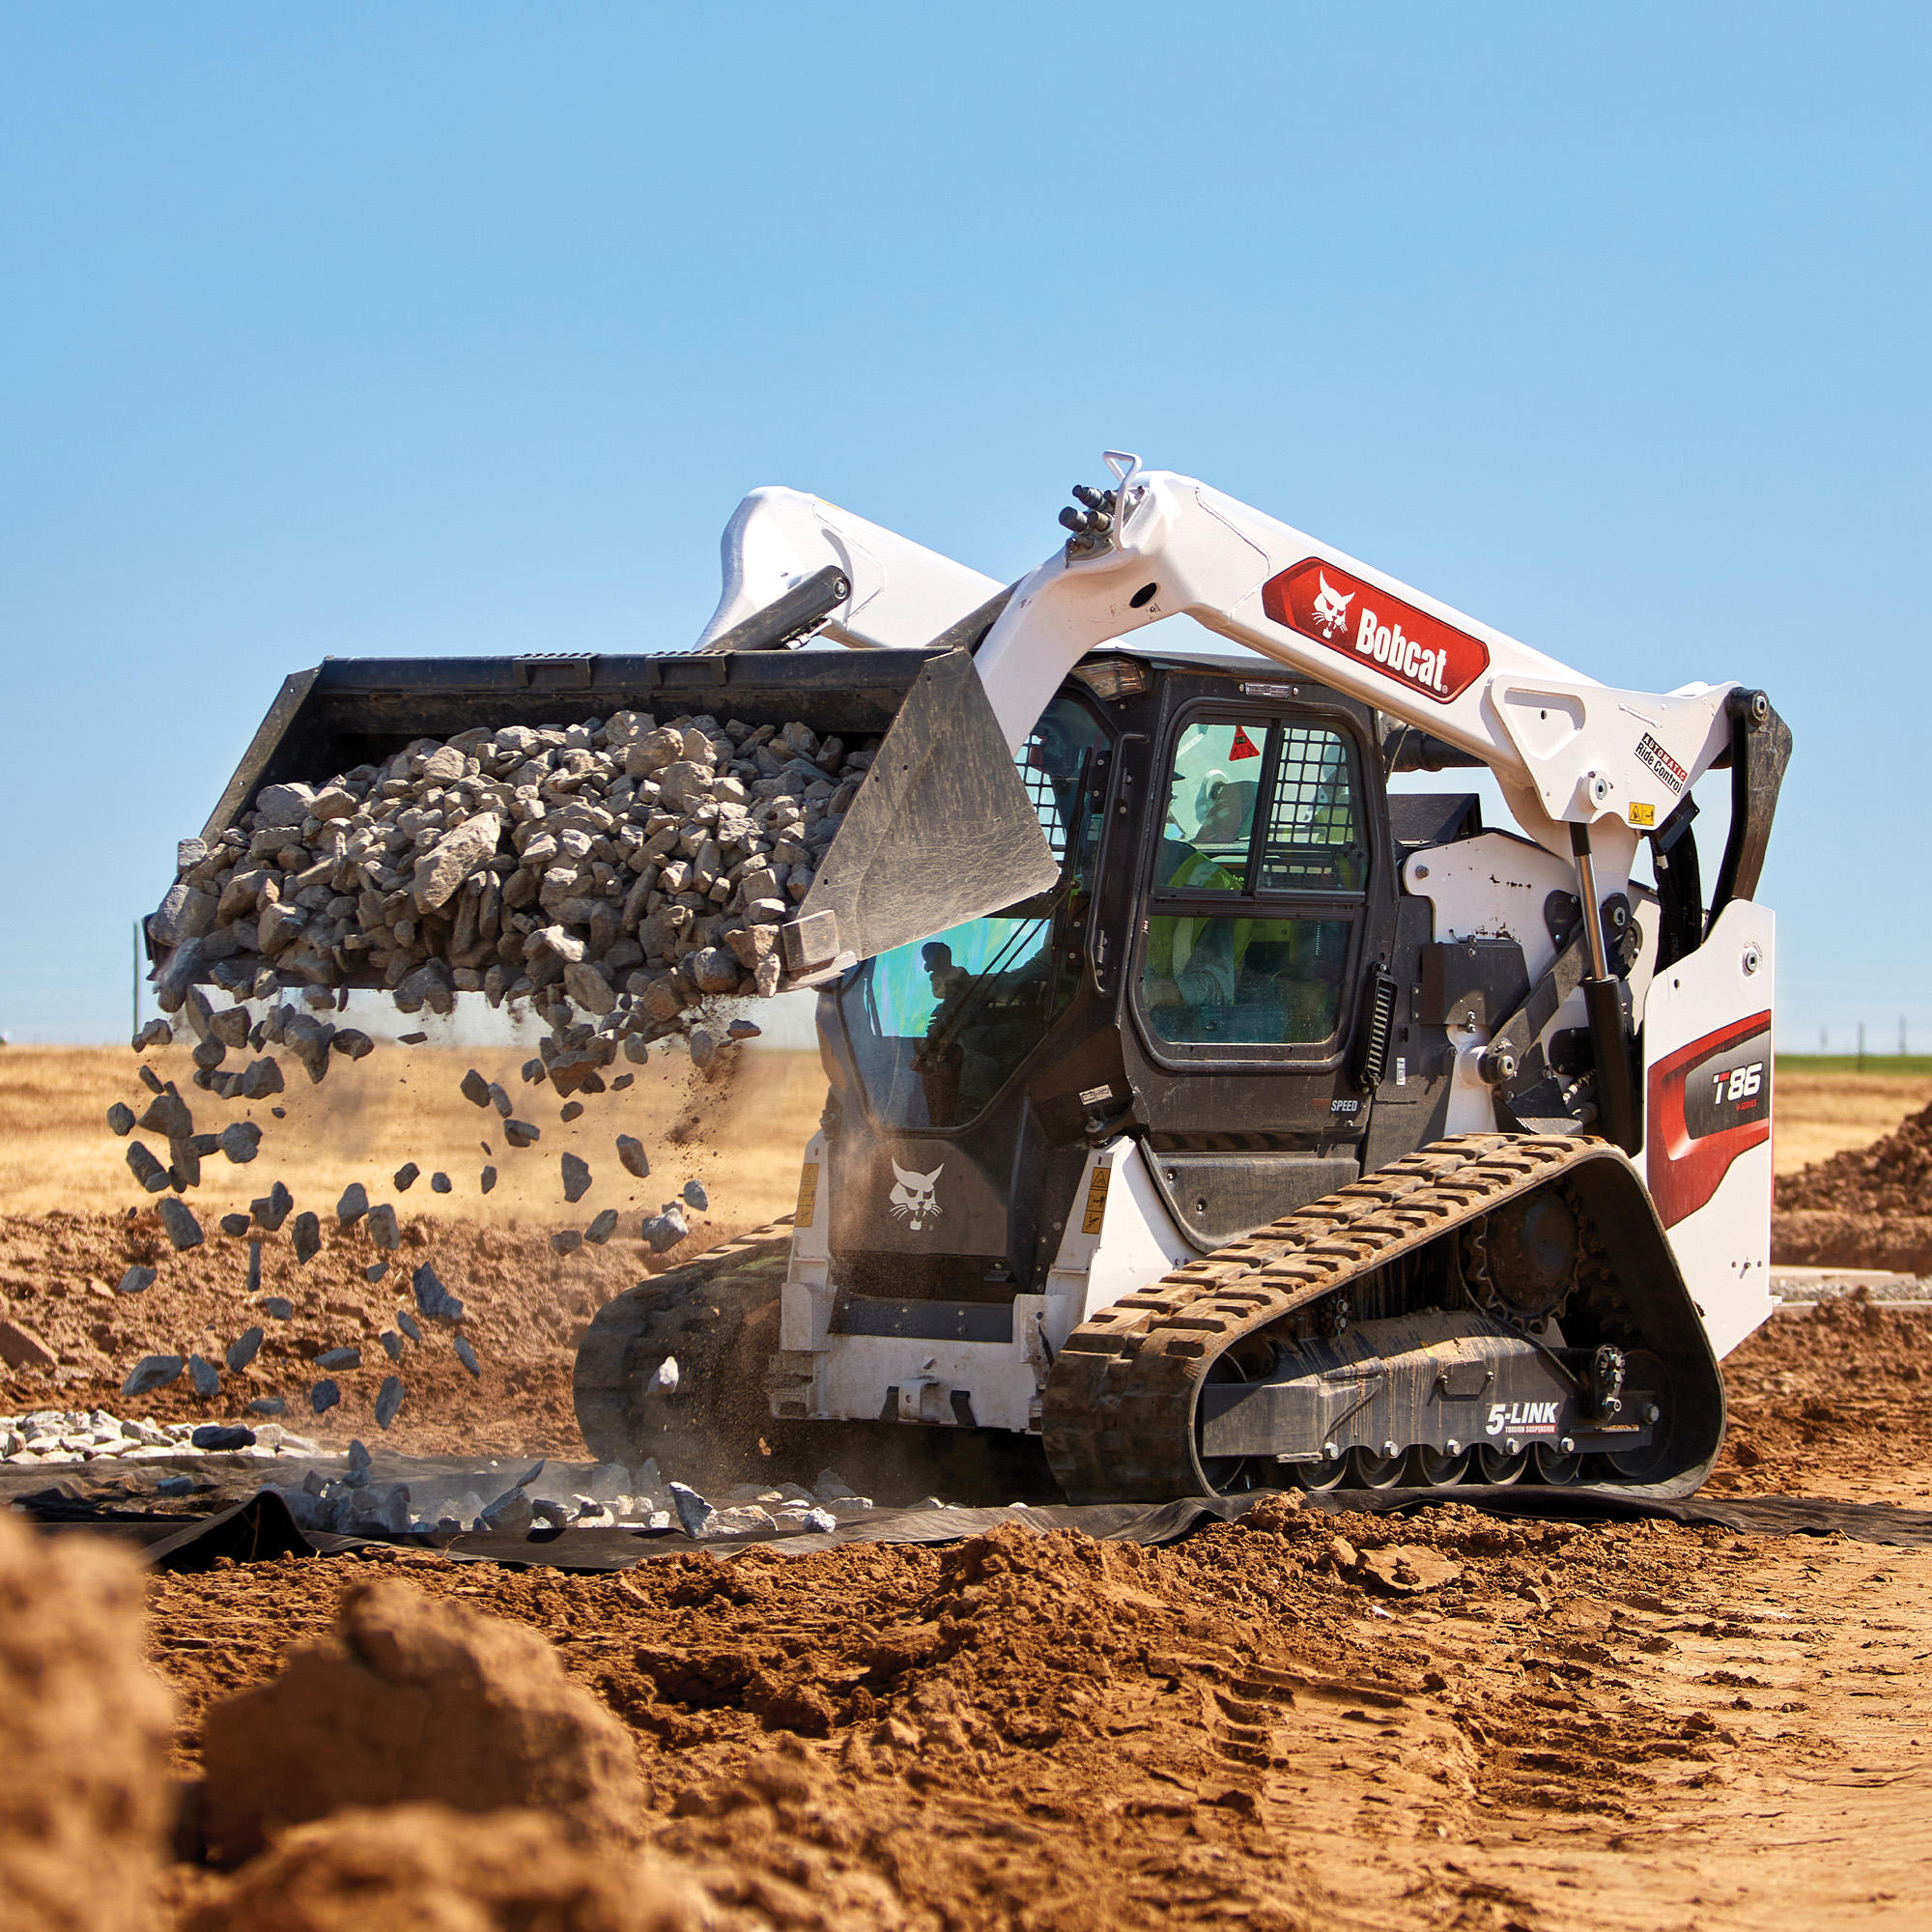 Bobcat T86 dumping and spreading rock with bucket Bobcat of Fort McMurray Fort Mcmurray (780)714-9200